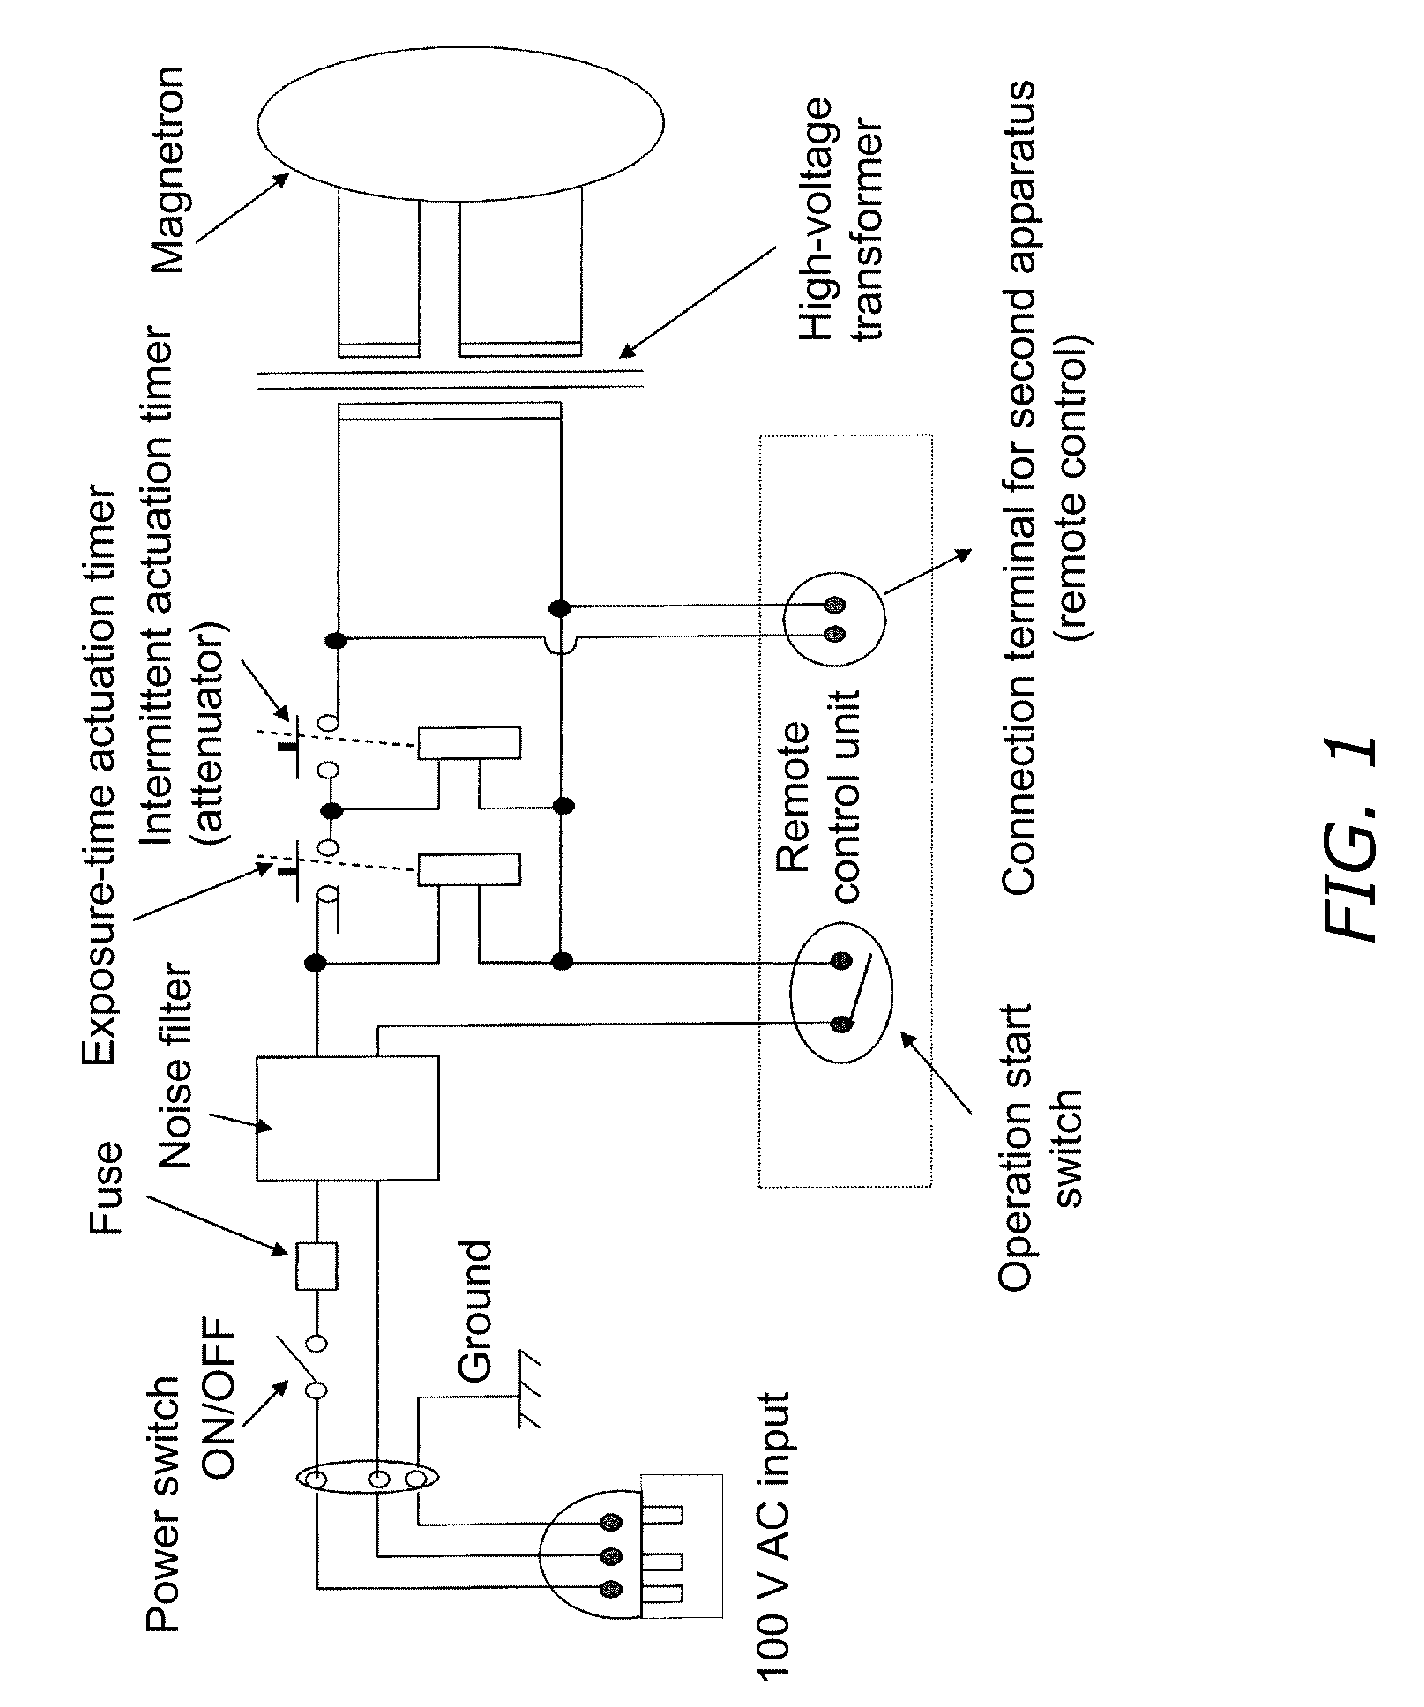 Microwave hyperthermia treatment apparatus and treatment system